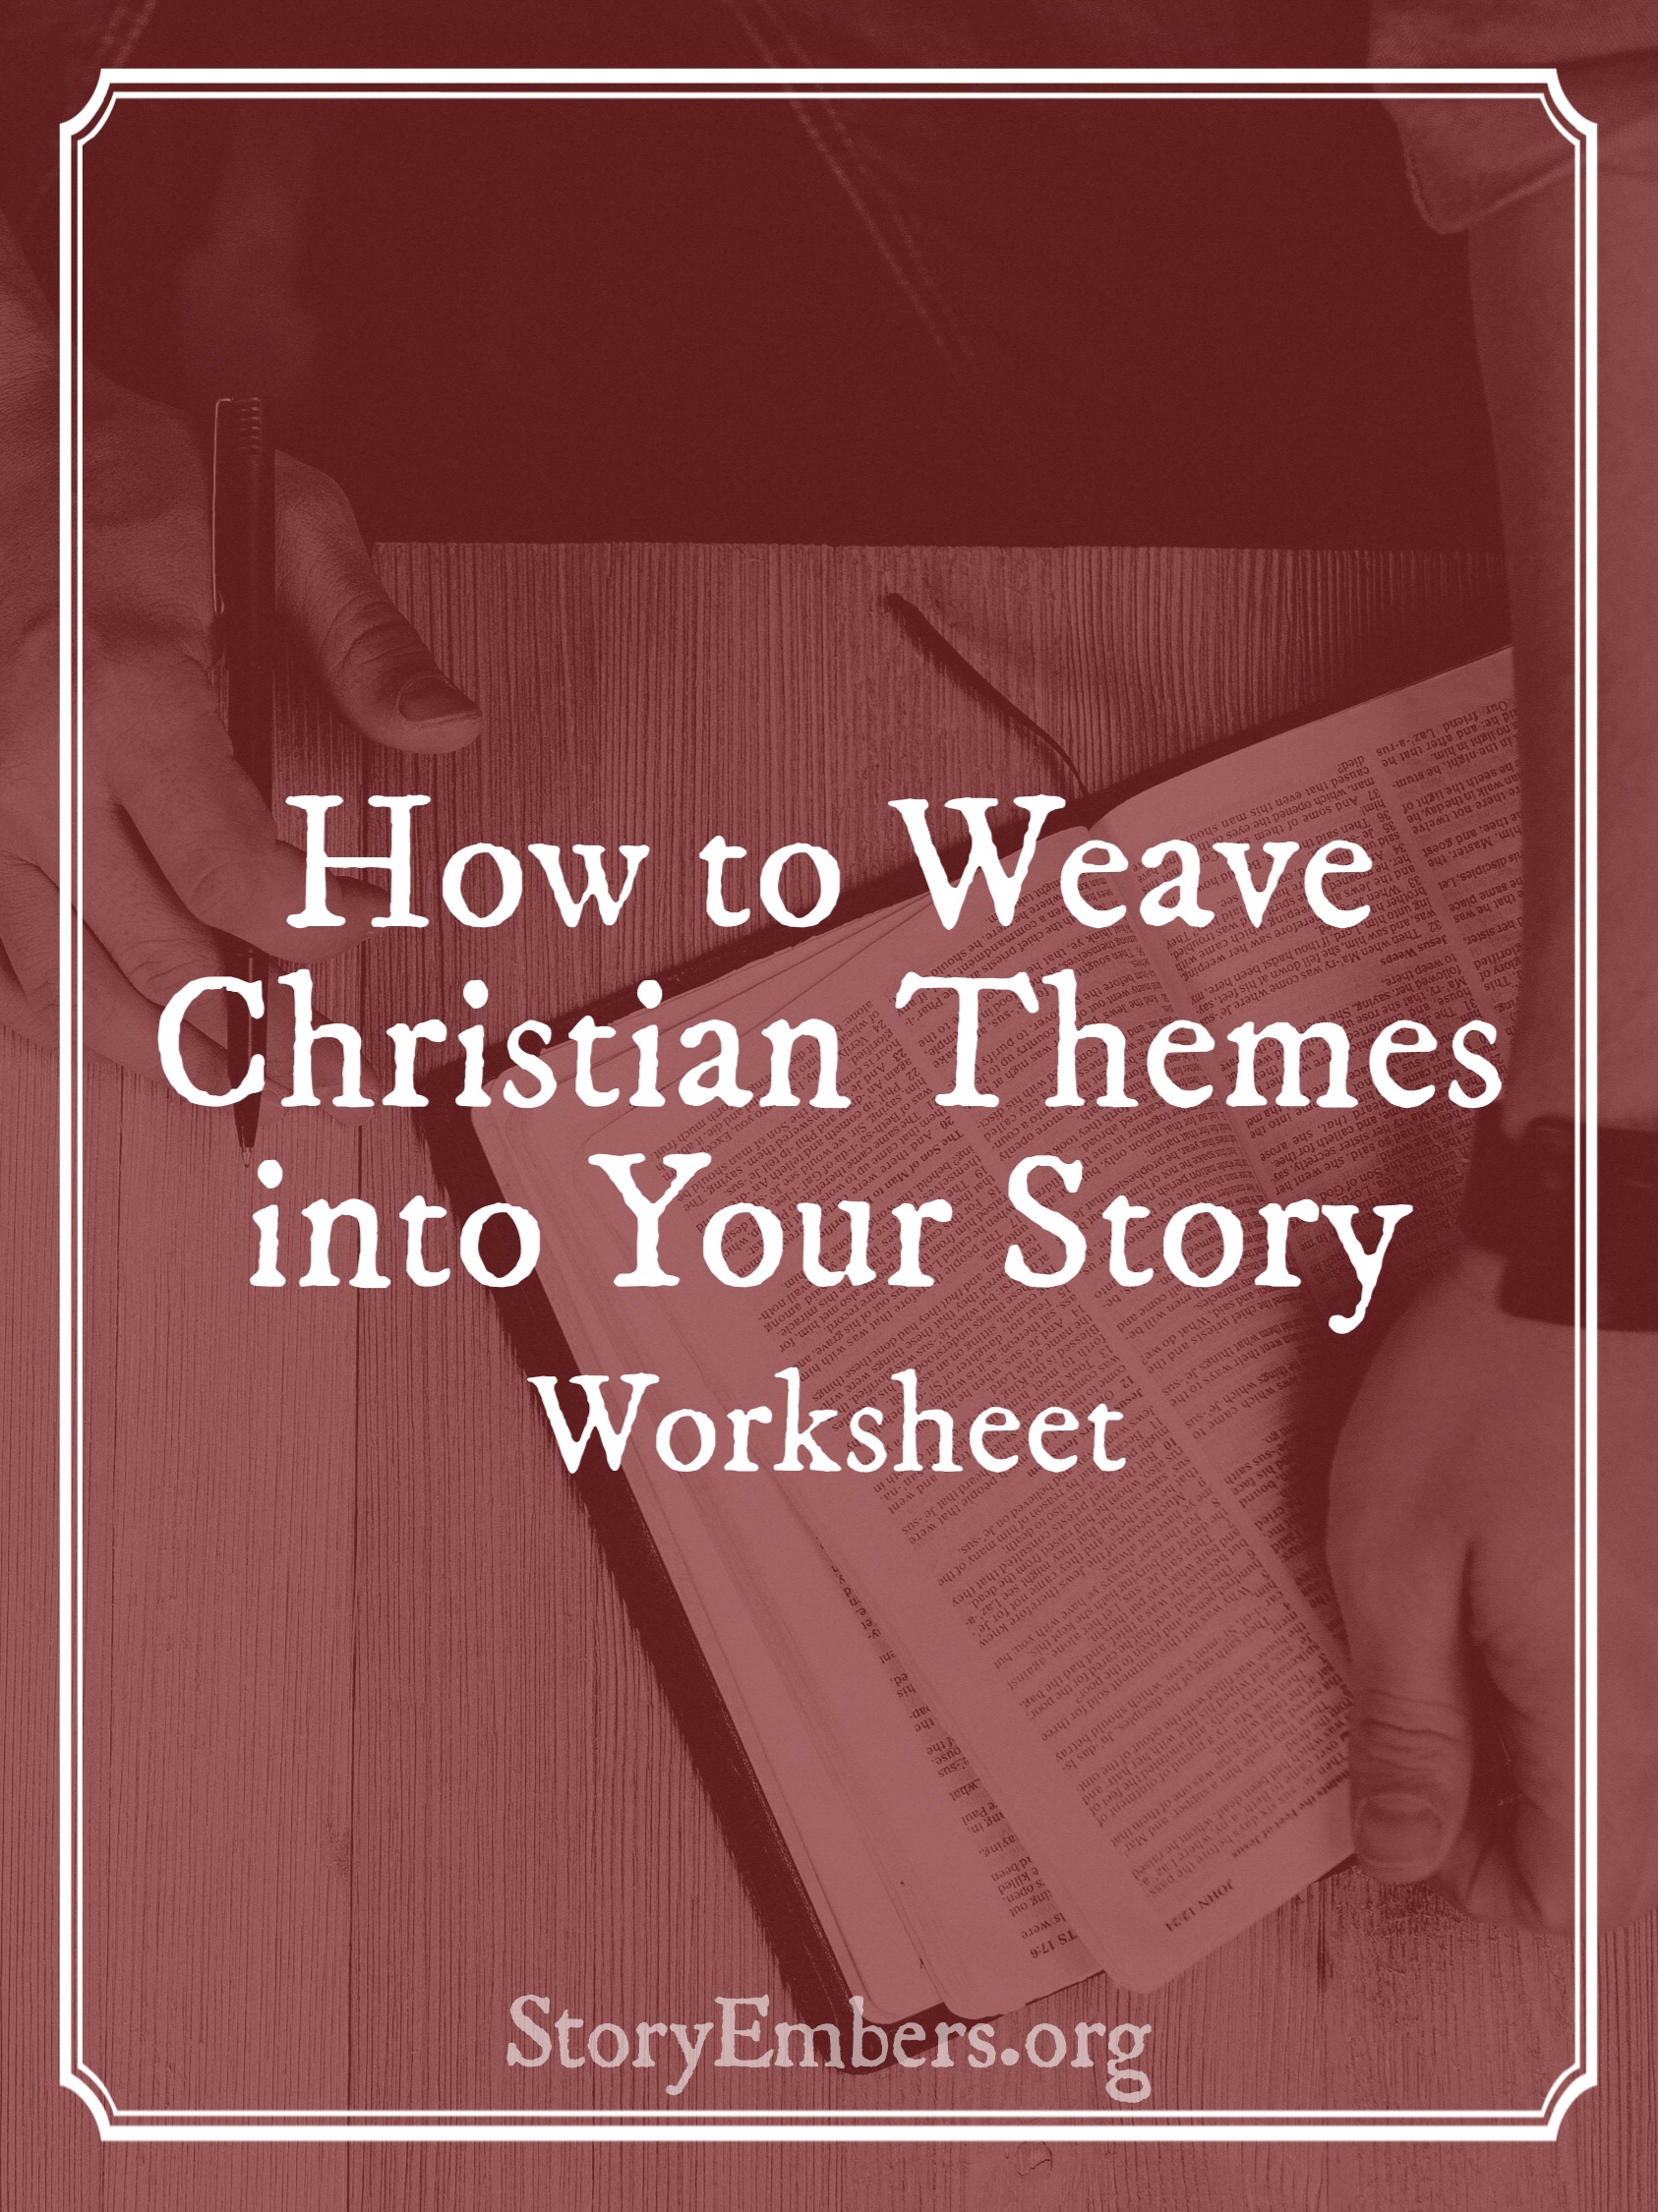 How to Weave Christian Themes Into Your Story